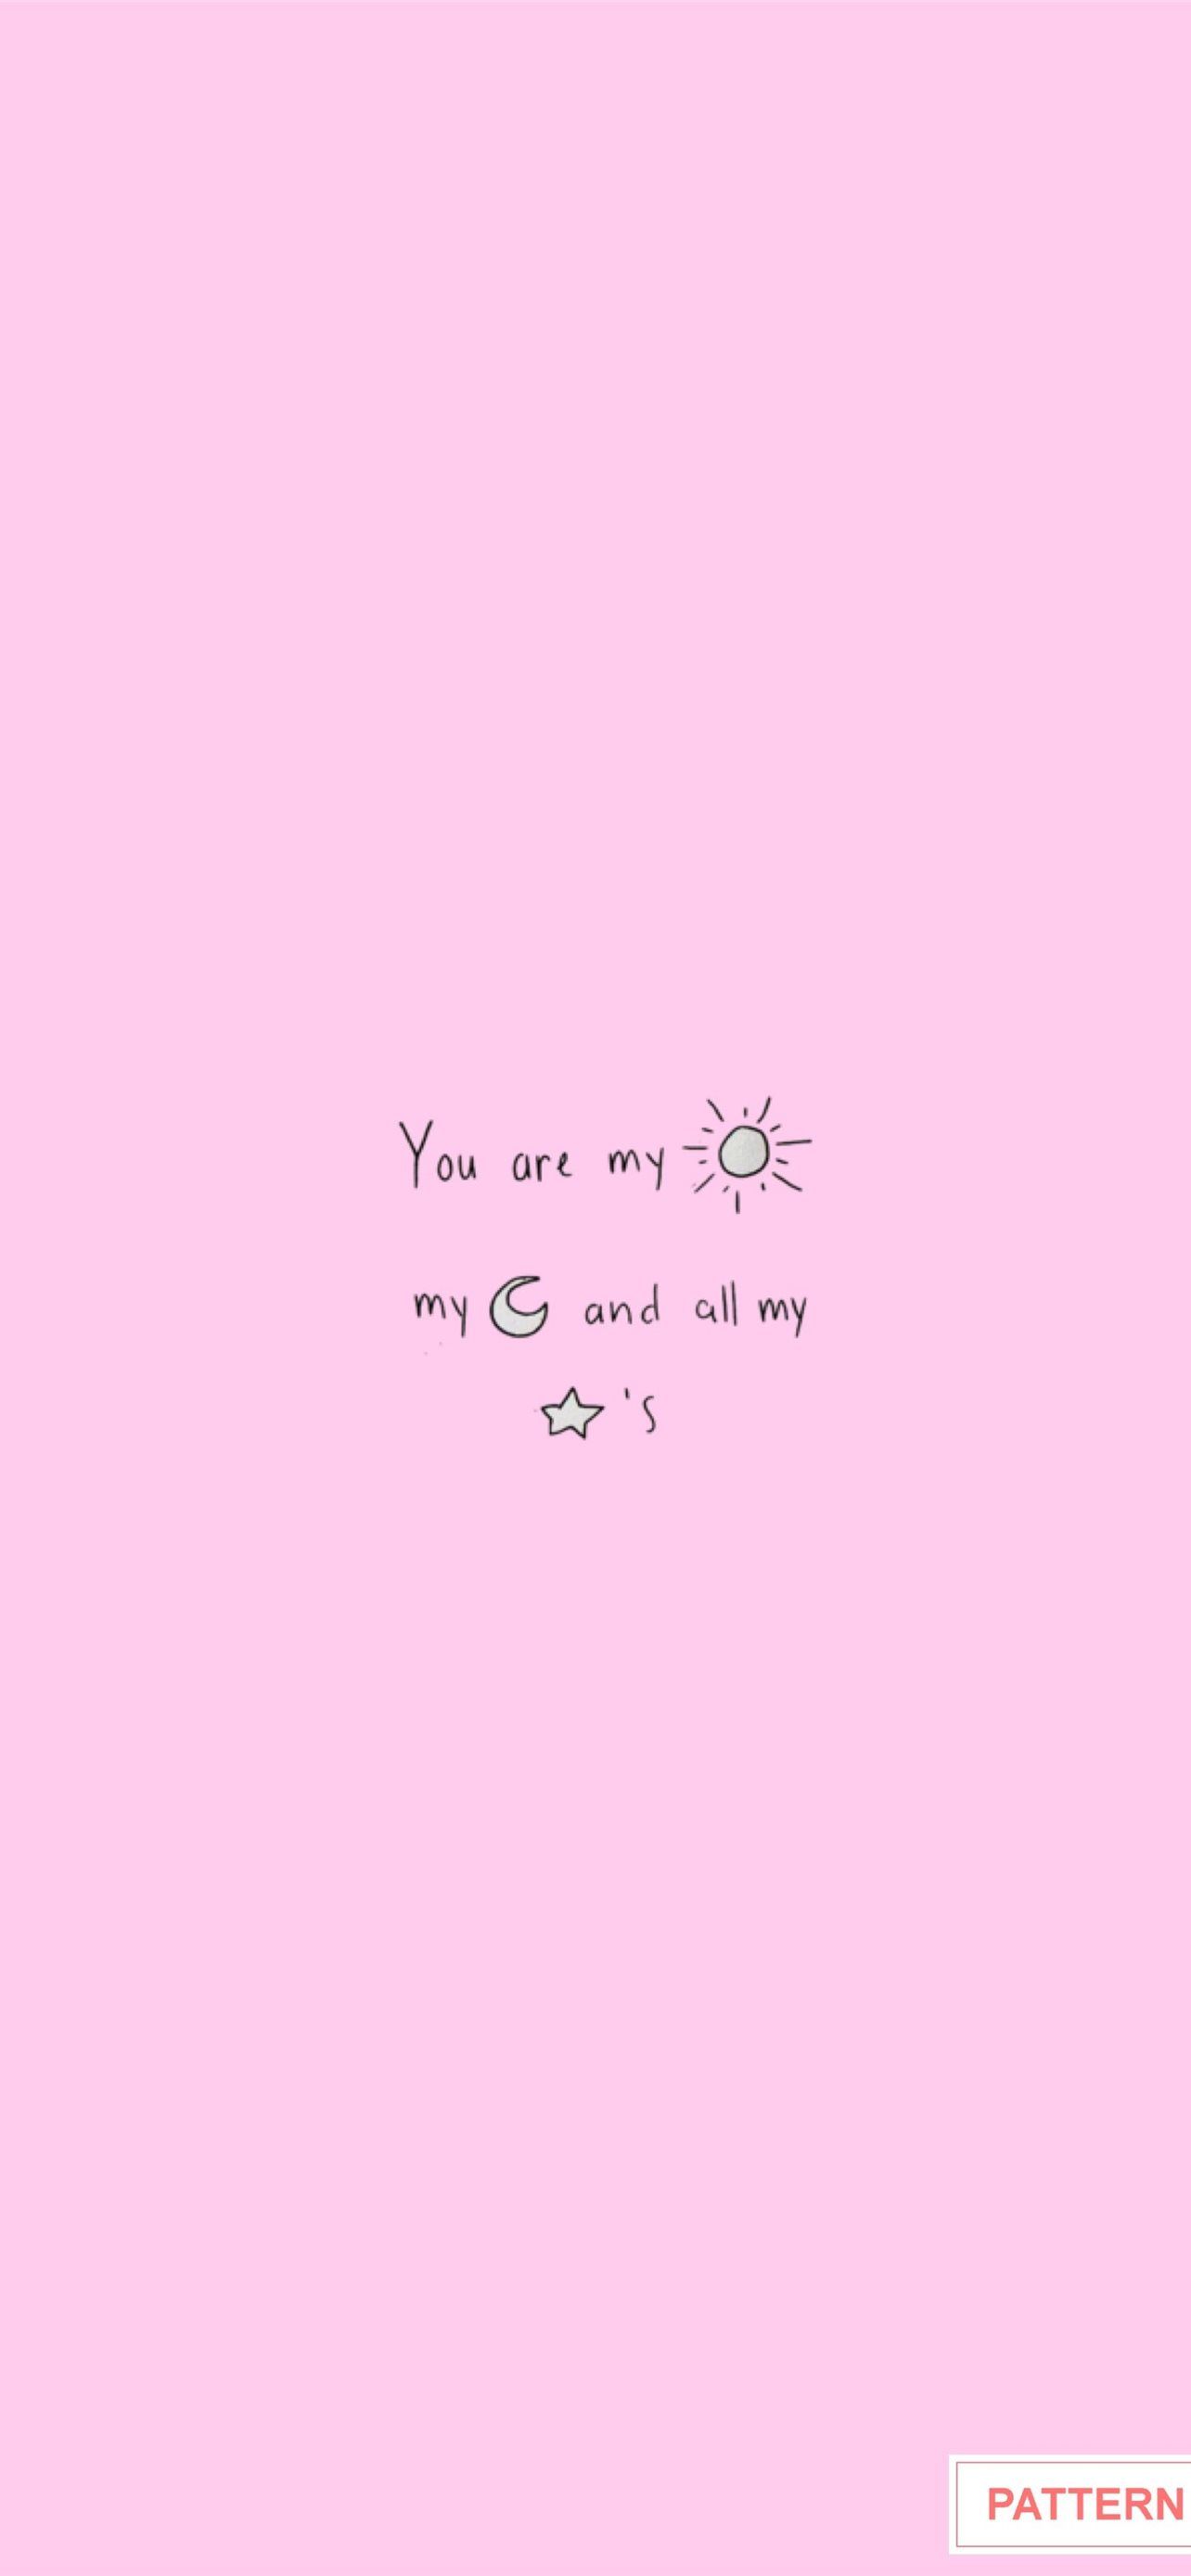 Aesthetic phone background, pink background, you are my sunshine - Cute iPhone